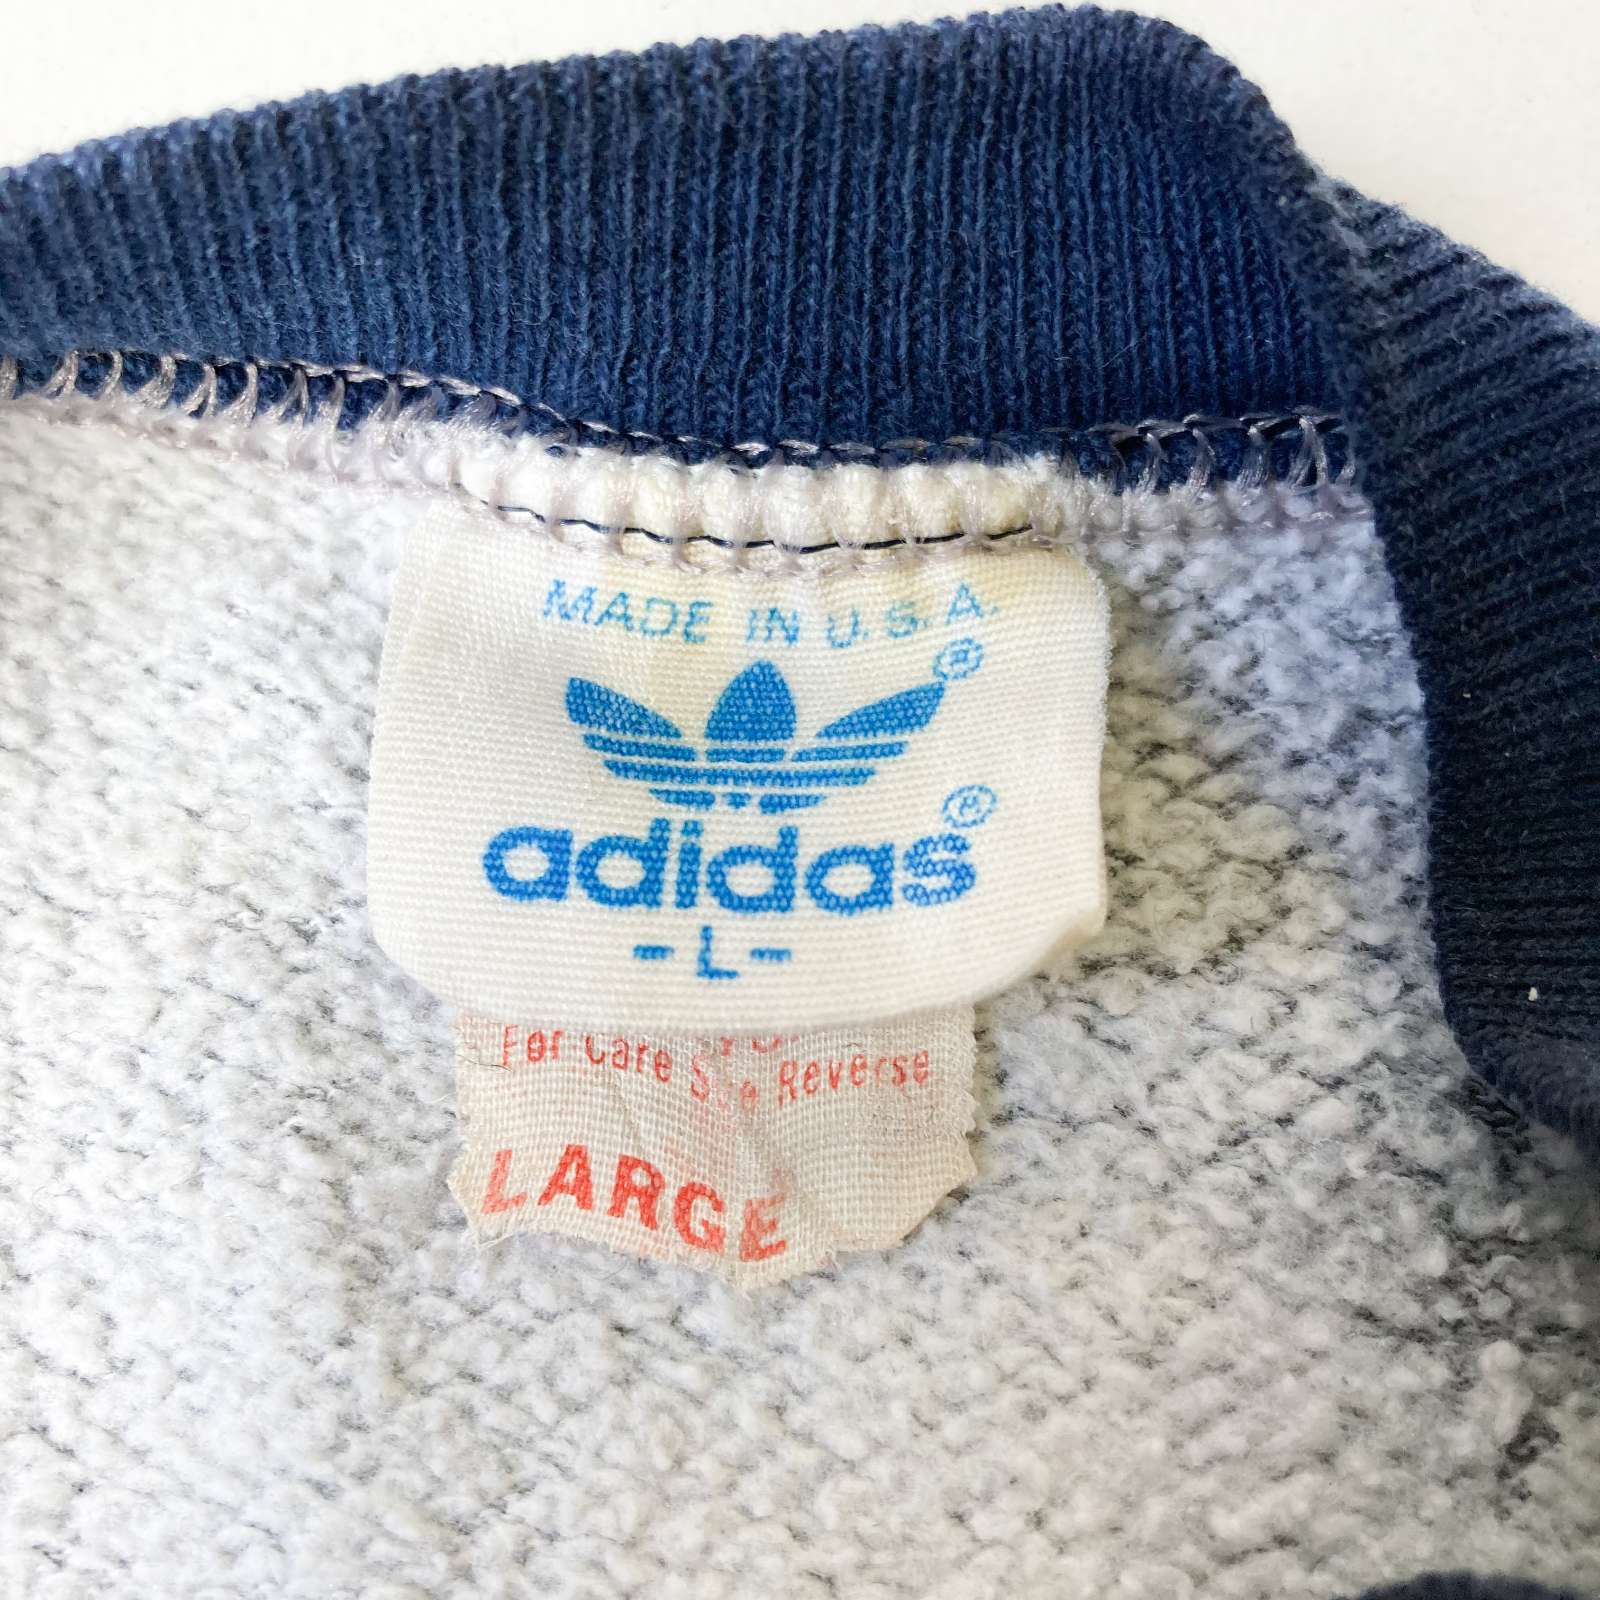 adidas　made in USA